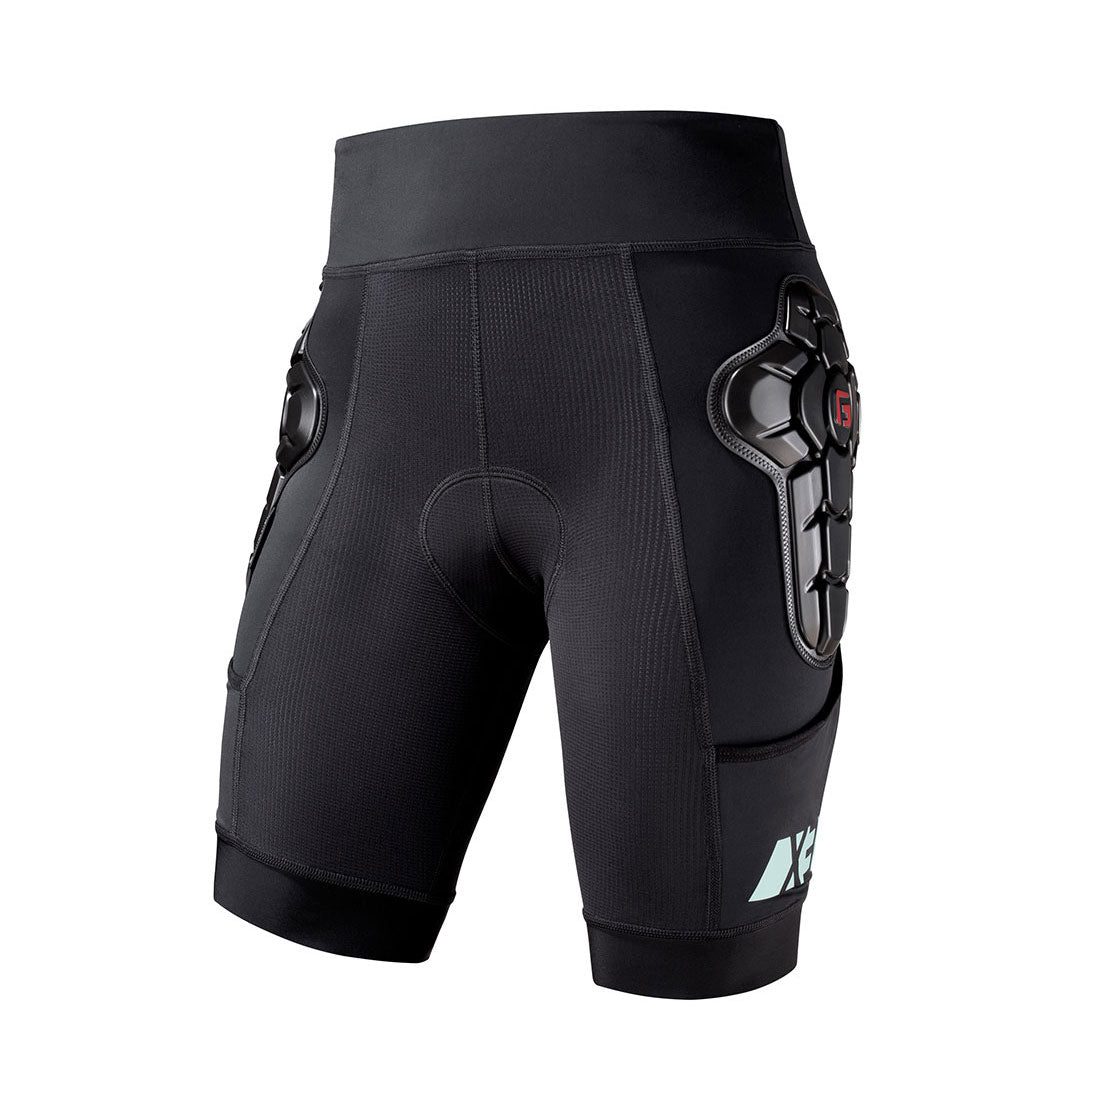 G-Form Pro-X3 Short Liners - Womens Protective Gear